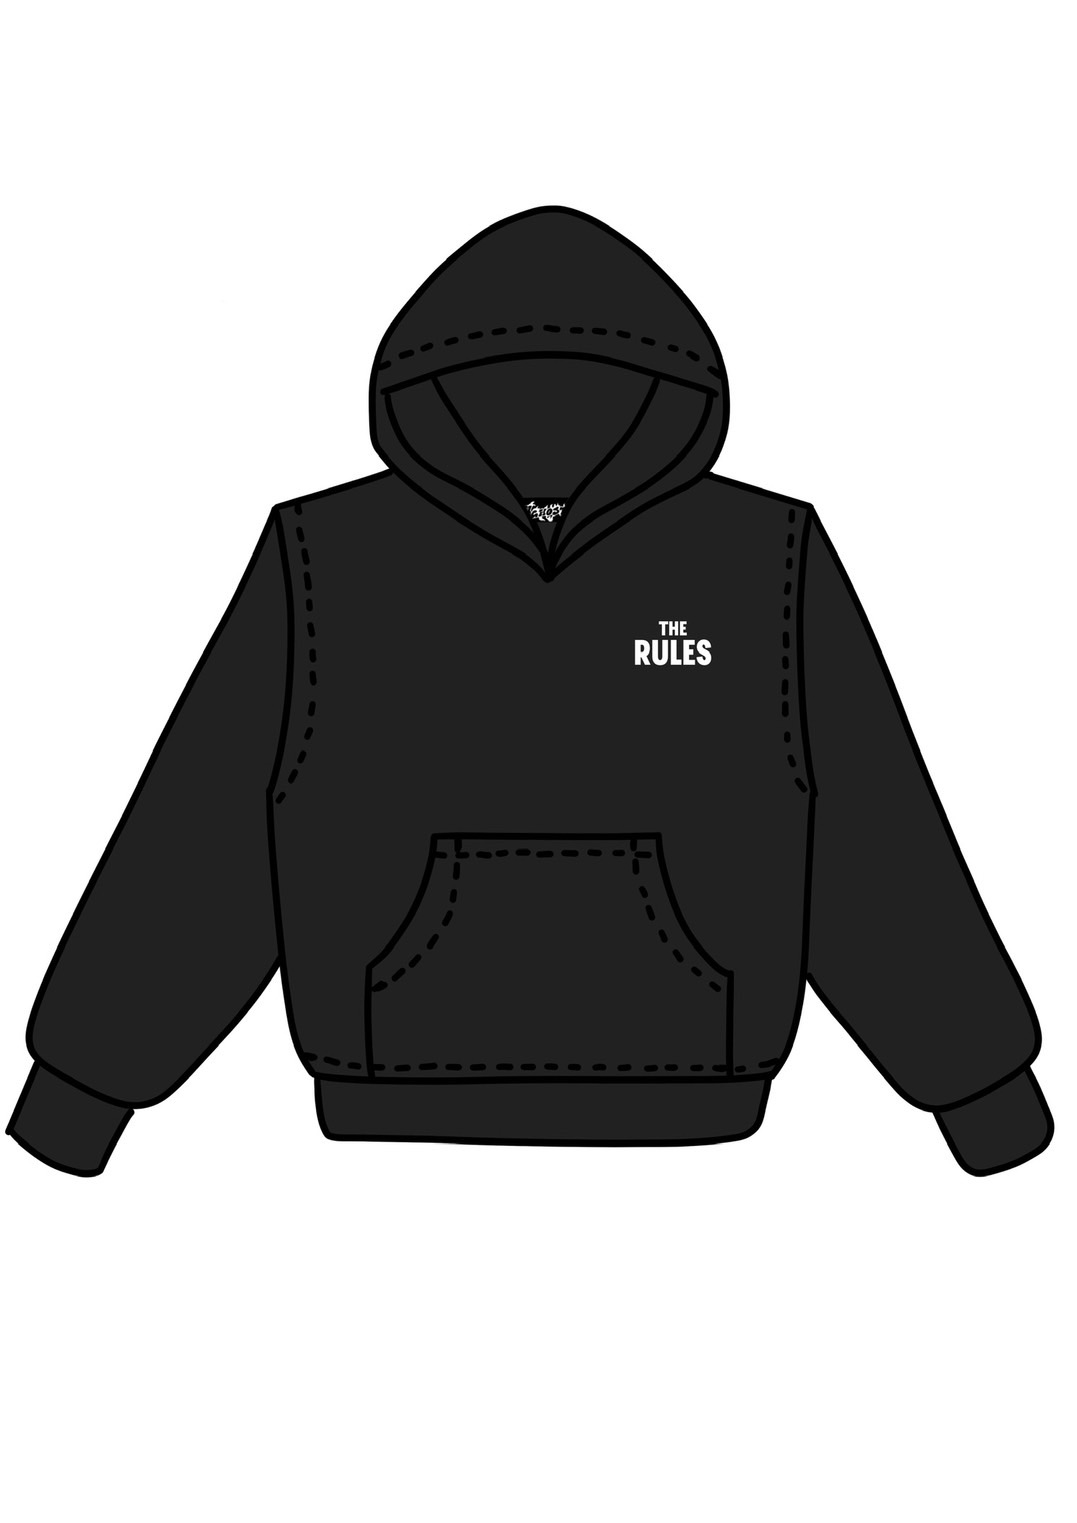 HI GHOST MOVE HOODIE(X’mas Limited Edition)